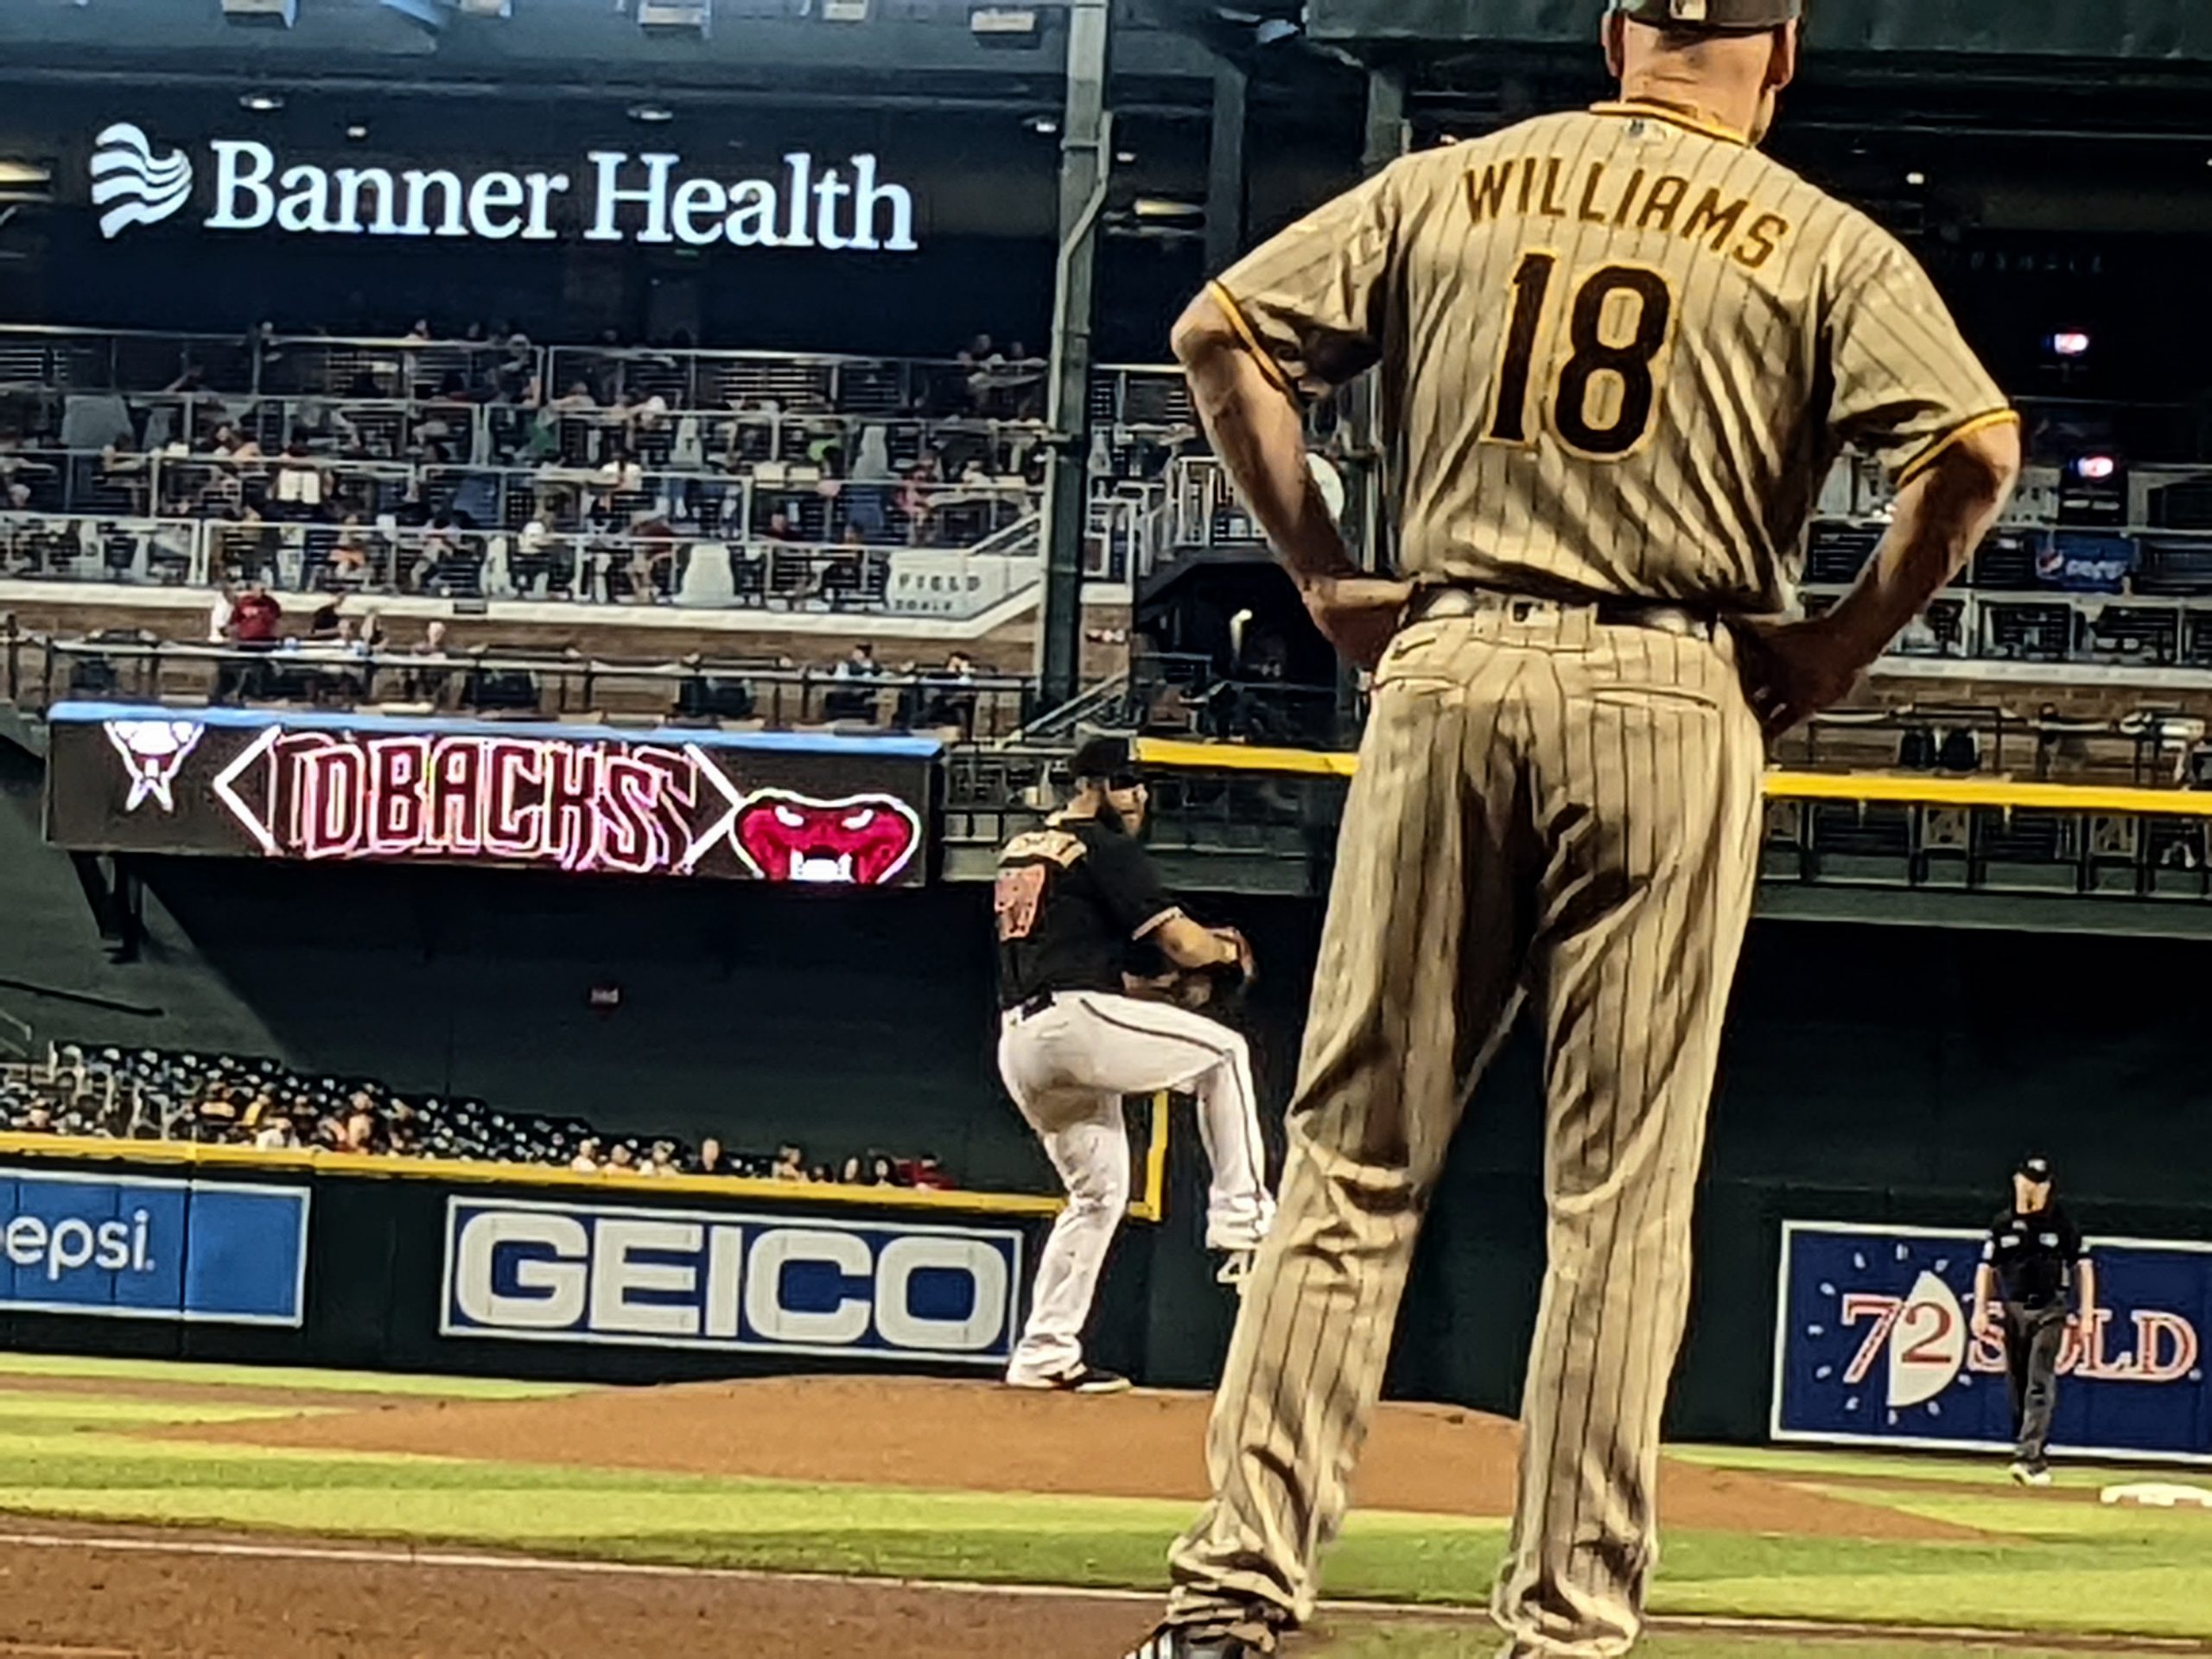 The Padres Uniforms: A Tired, Yet Necessary Topic.